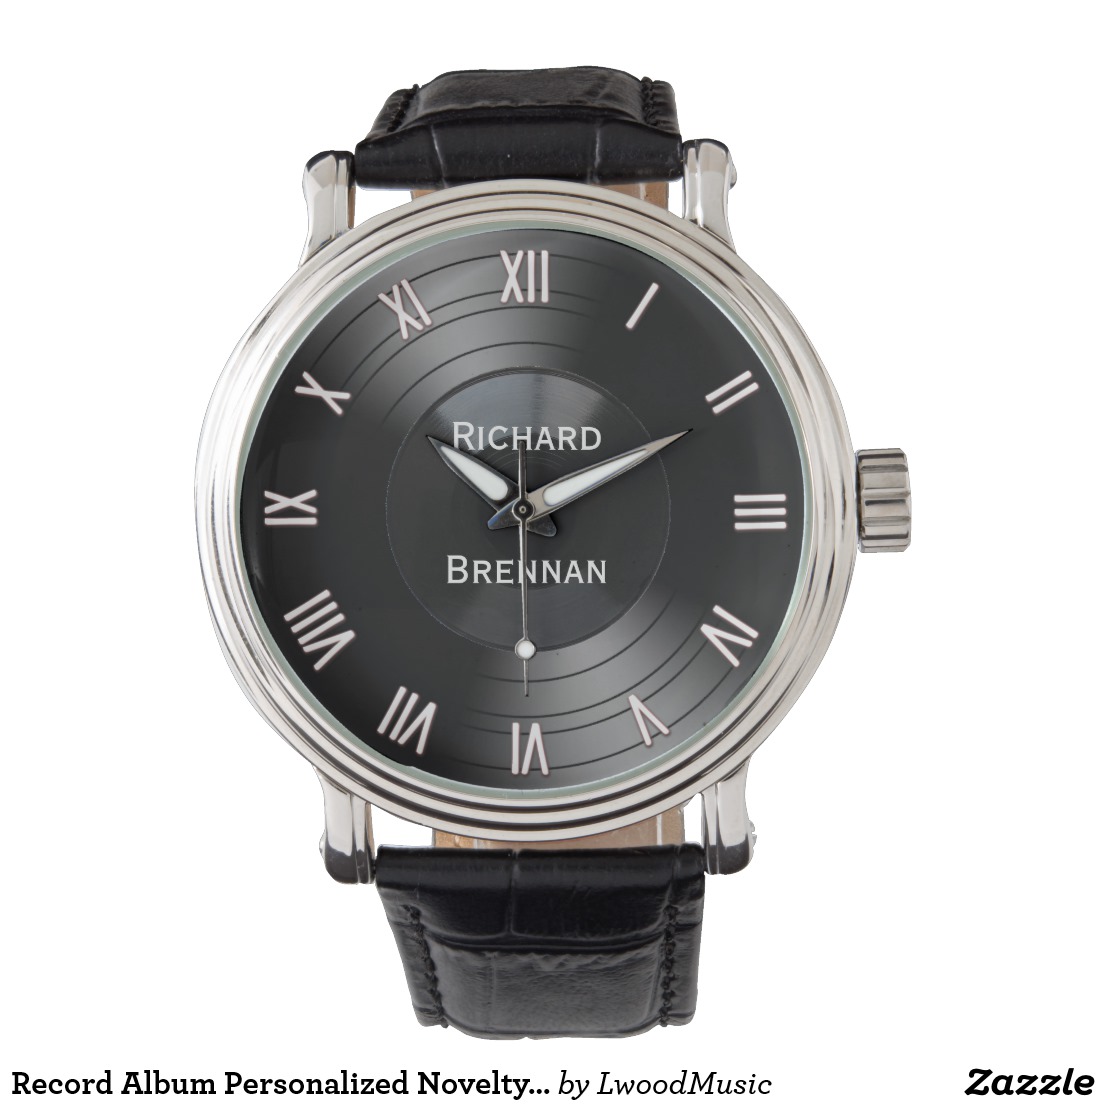 Record Album Personalized Novelty Roman Numerals Watch